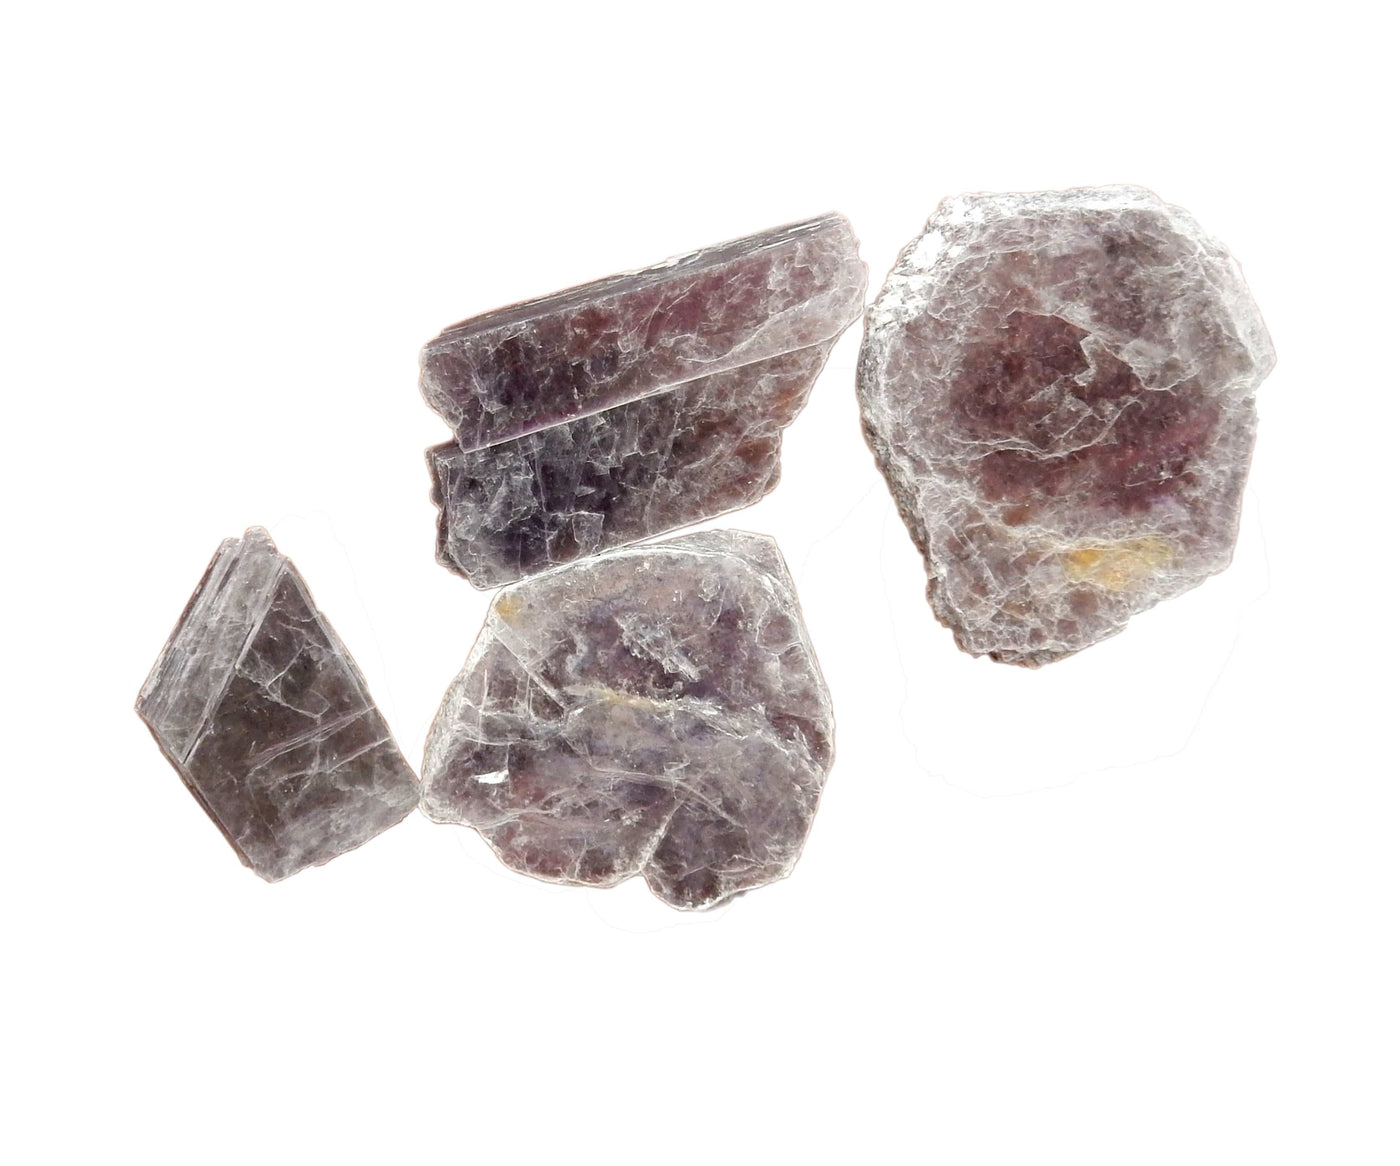 4 different sizes of the lepidolite Mica stones to show how the stones may vary